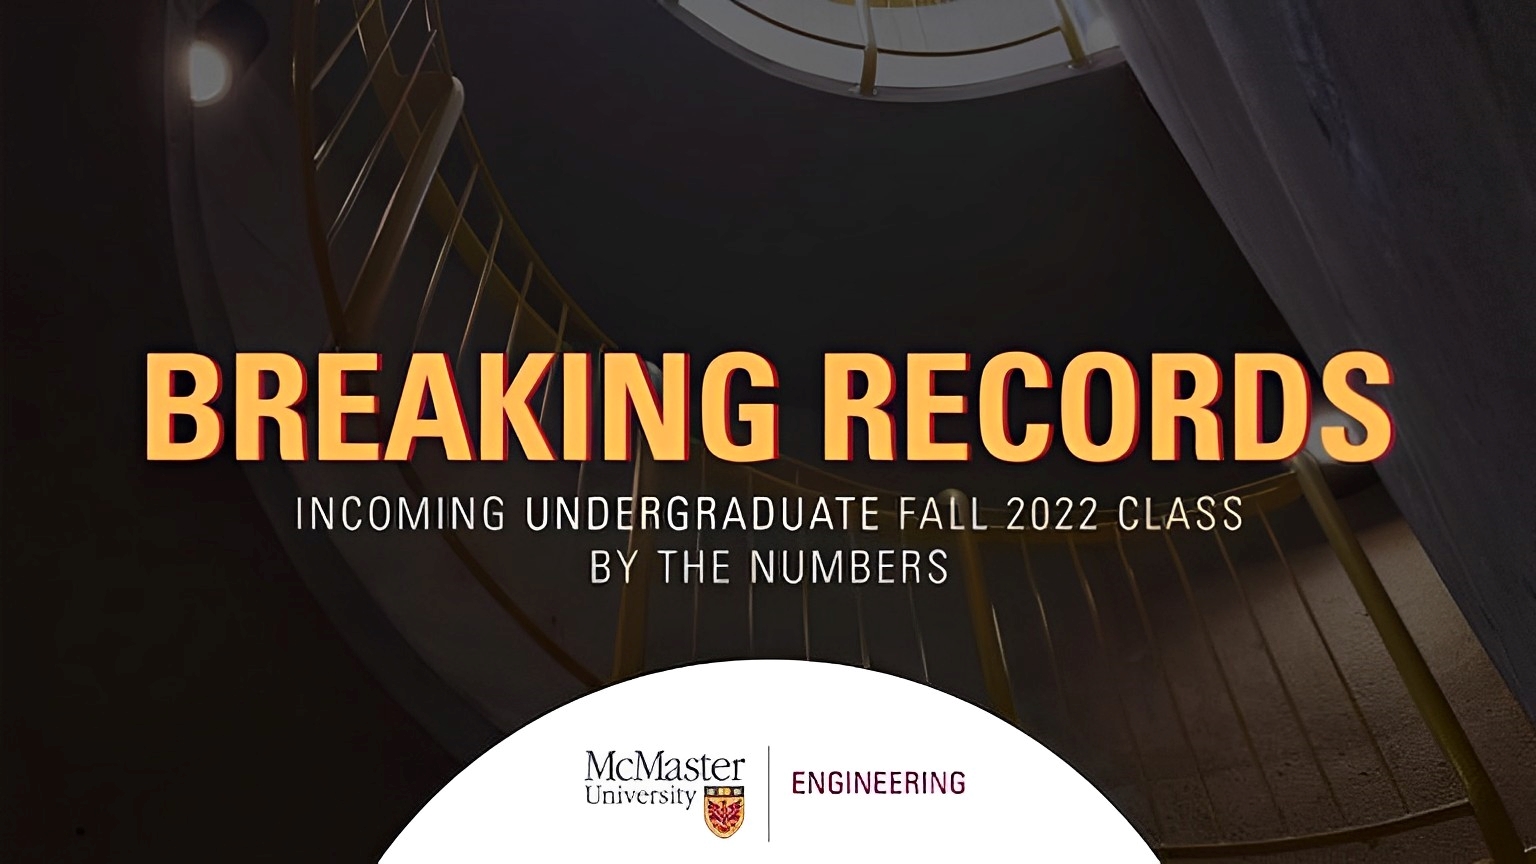 Breaking Records, incoming undergraduate fall 2022 class by the numbers